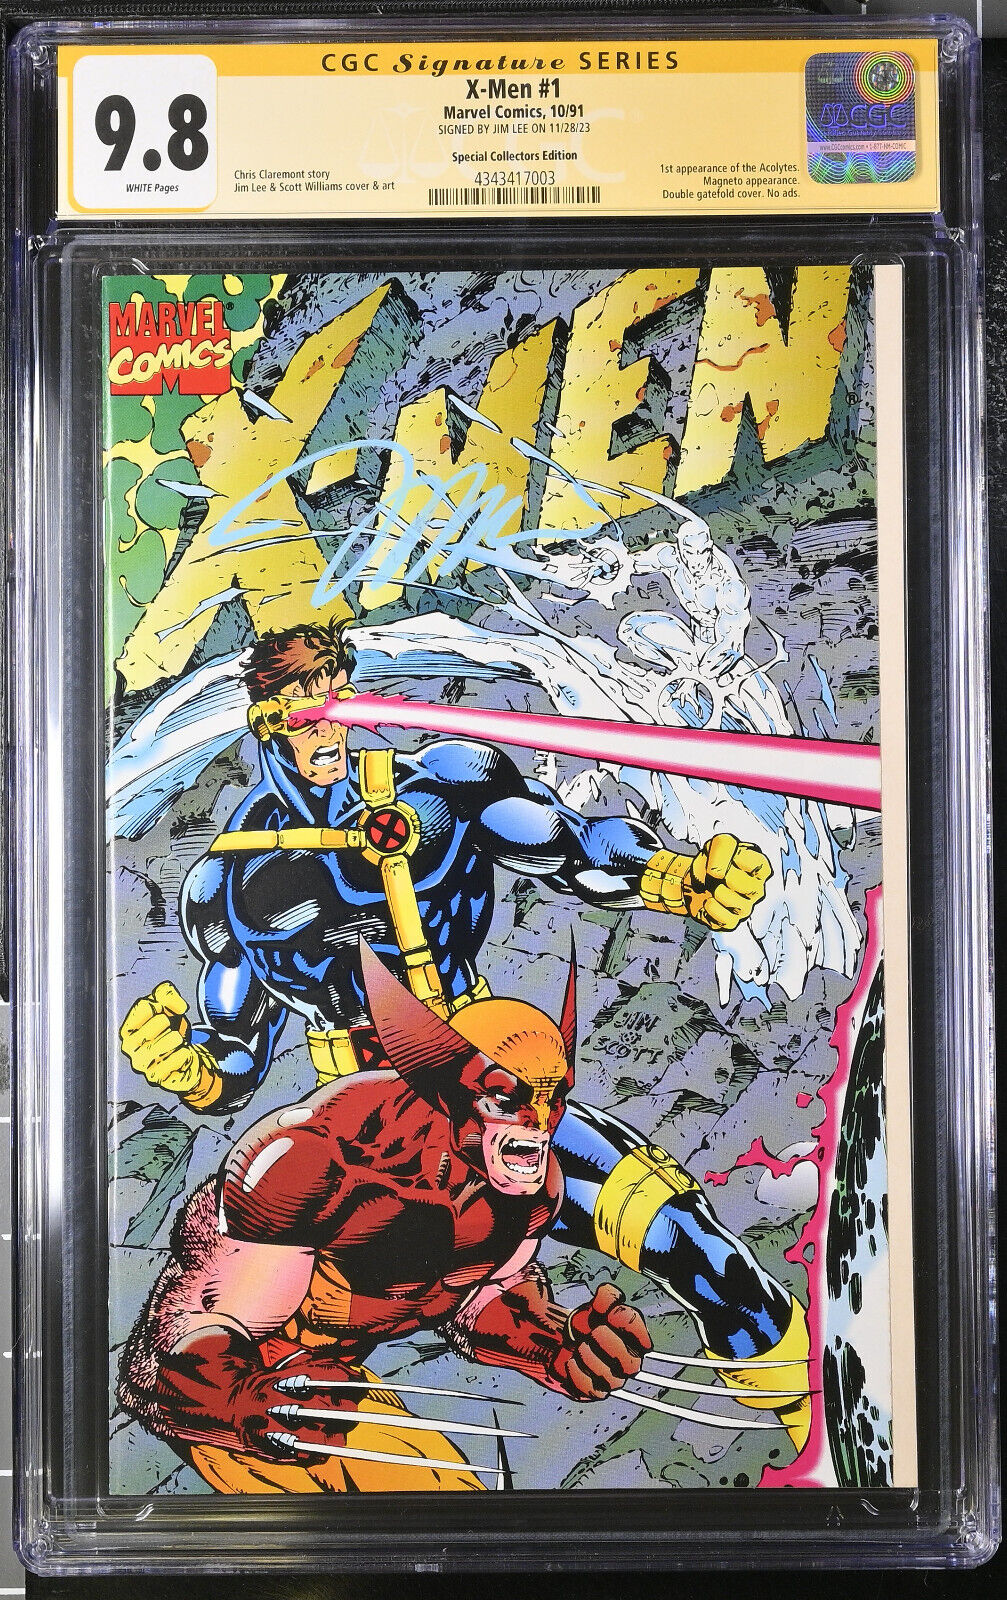 X-MEN #1 Special Edition Gate Fold , CGC 9.8 SS SIGNED BY JIM LEE 4343417003